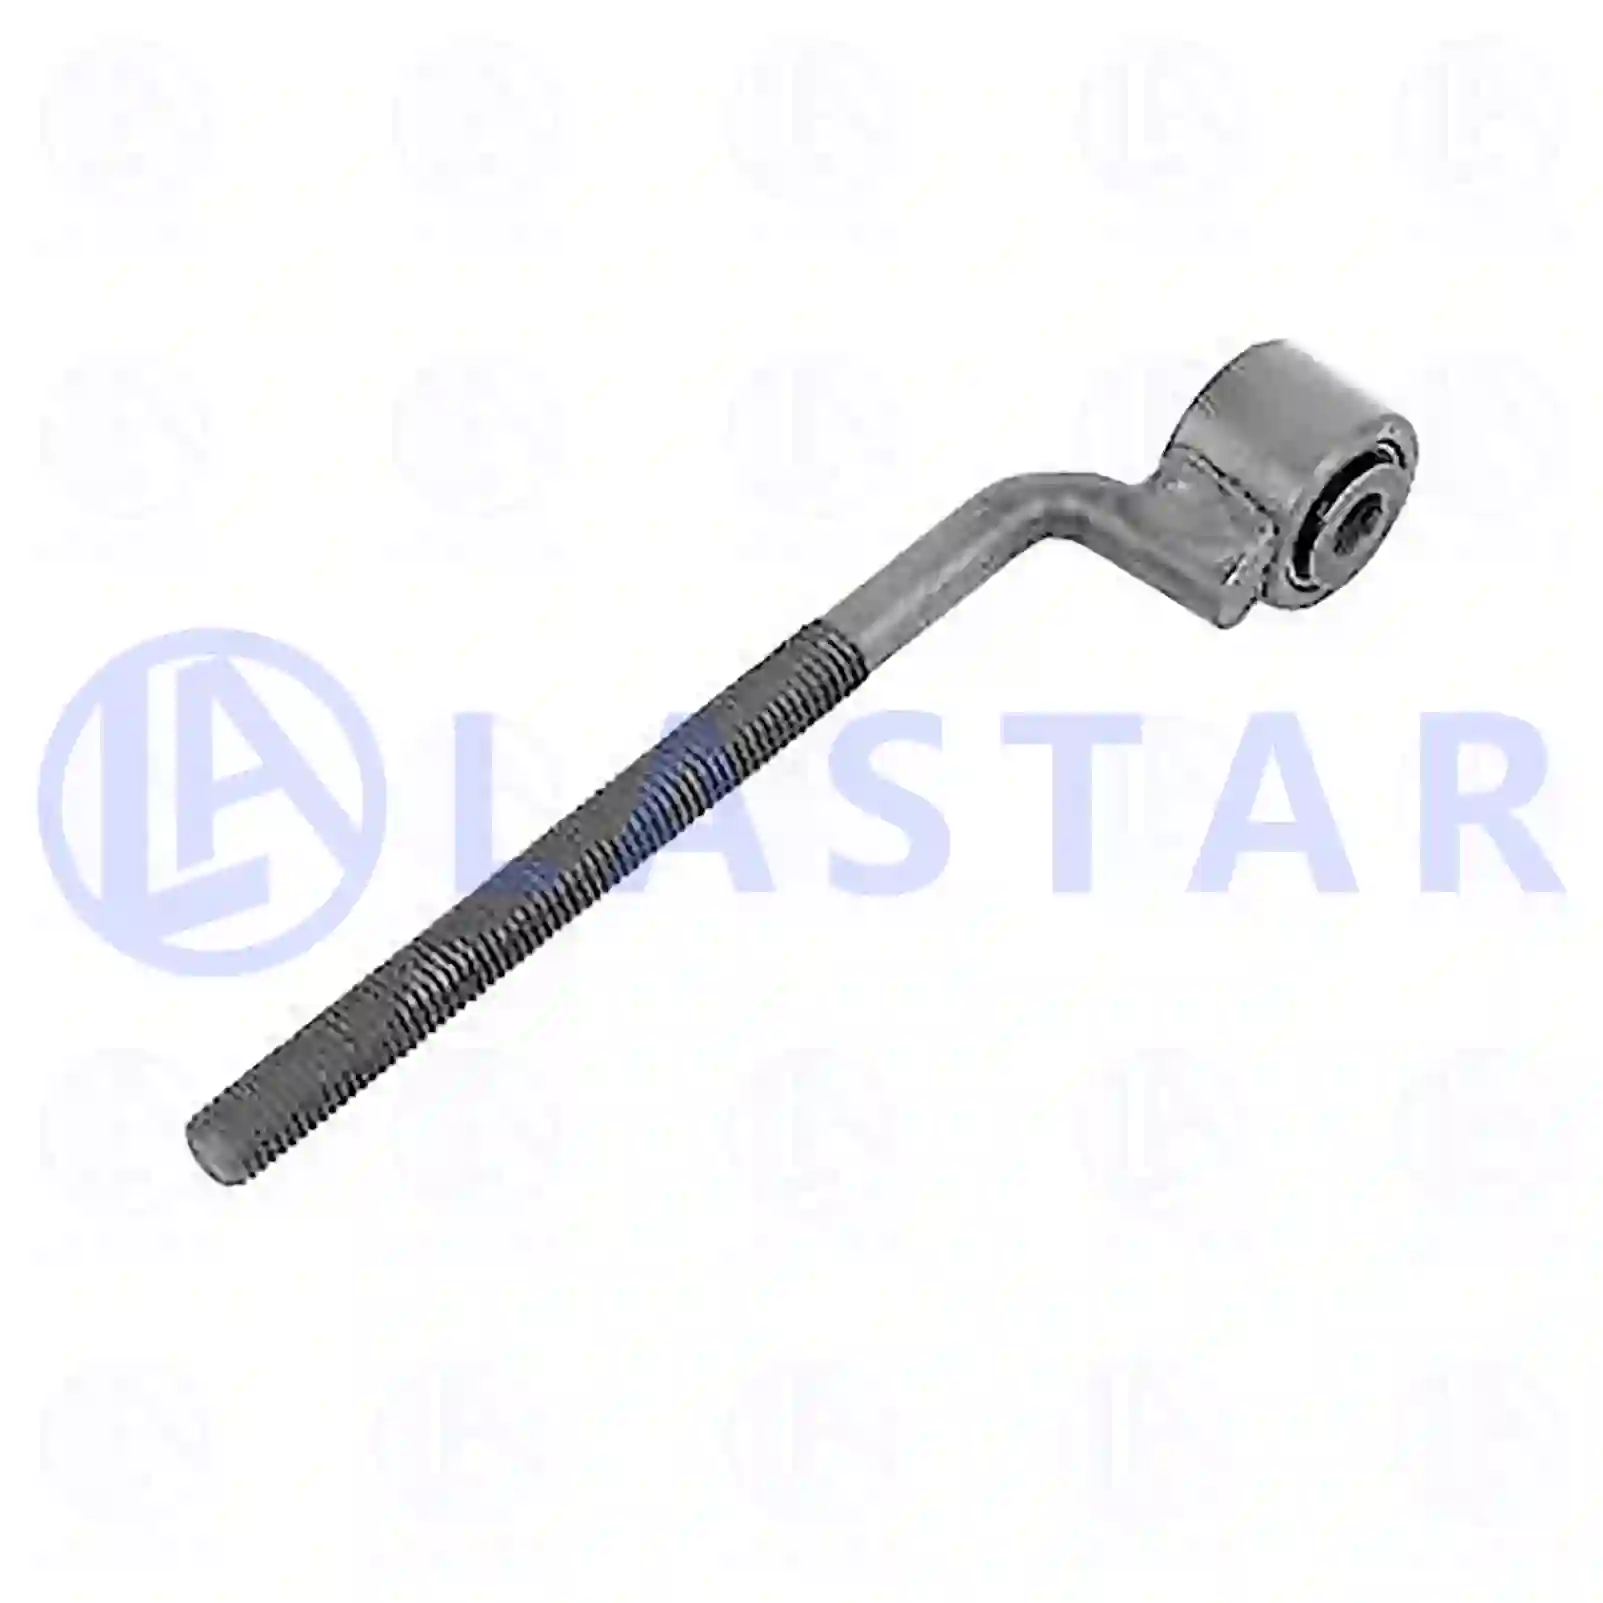  Clamping screw || Lastar Spare Part | Truck Spare Parts, Auotomotive Spare Parts